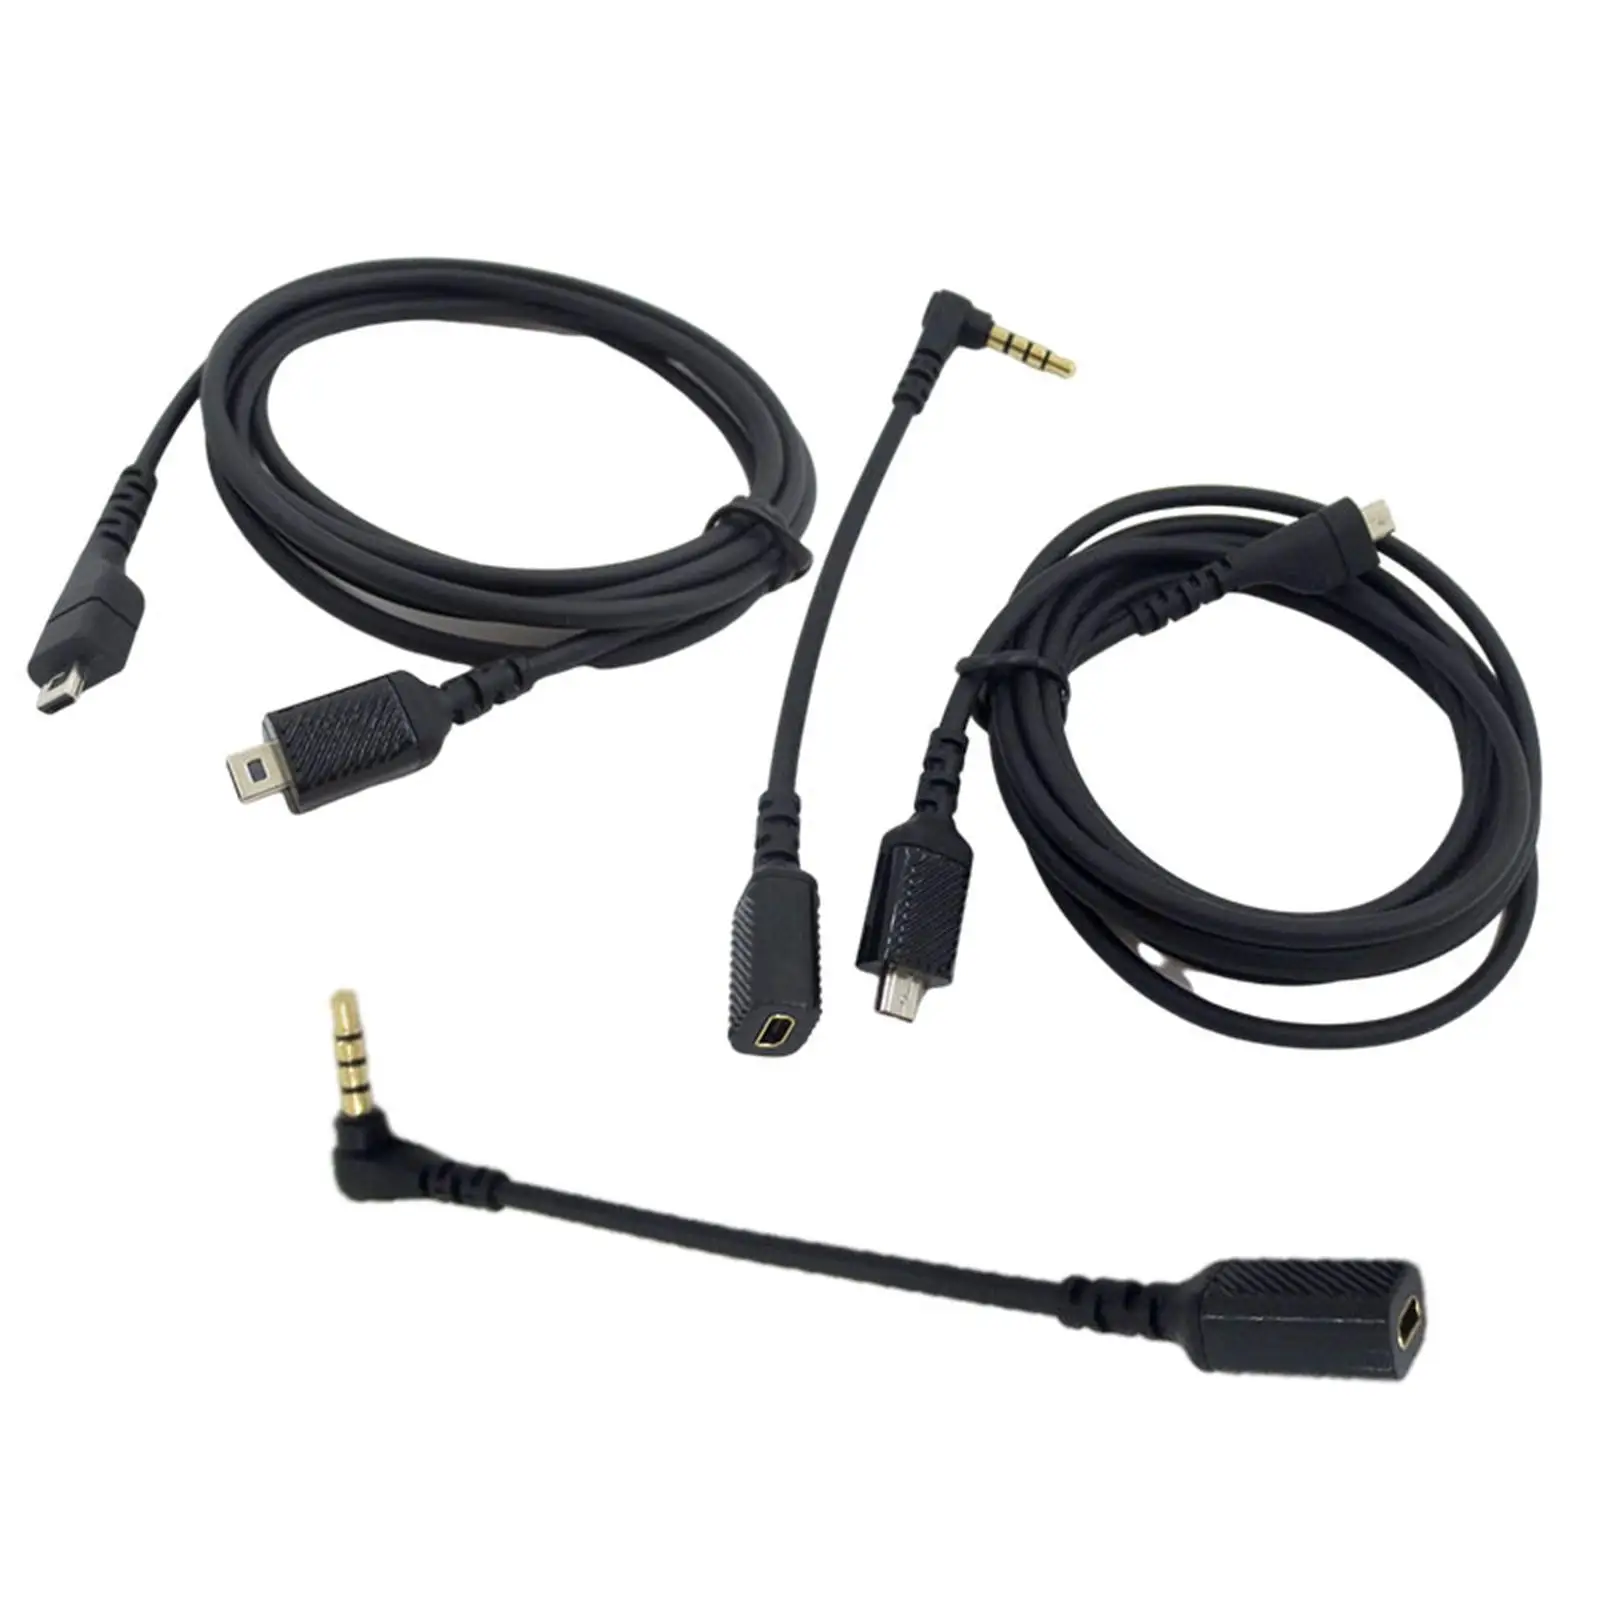 Audio Adapter Cable Headphone Converter Line Cord for Arctis 3 5 7 PC Laptop Accessories